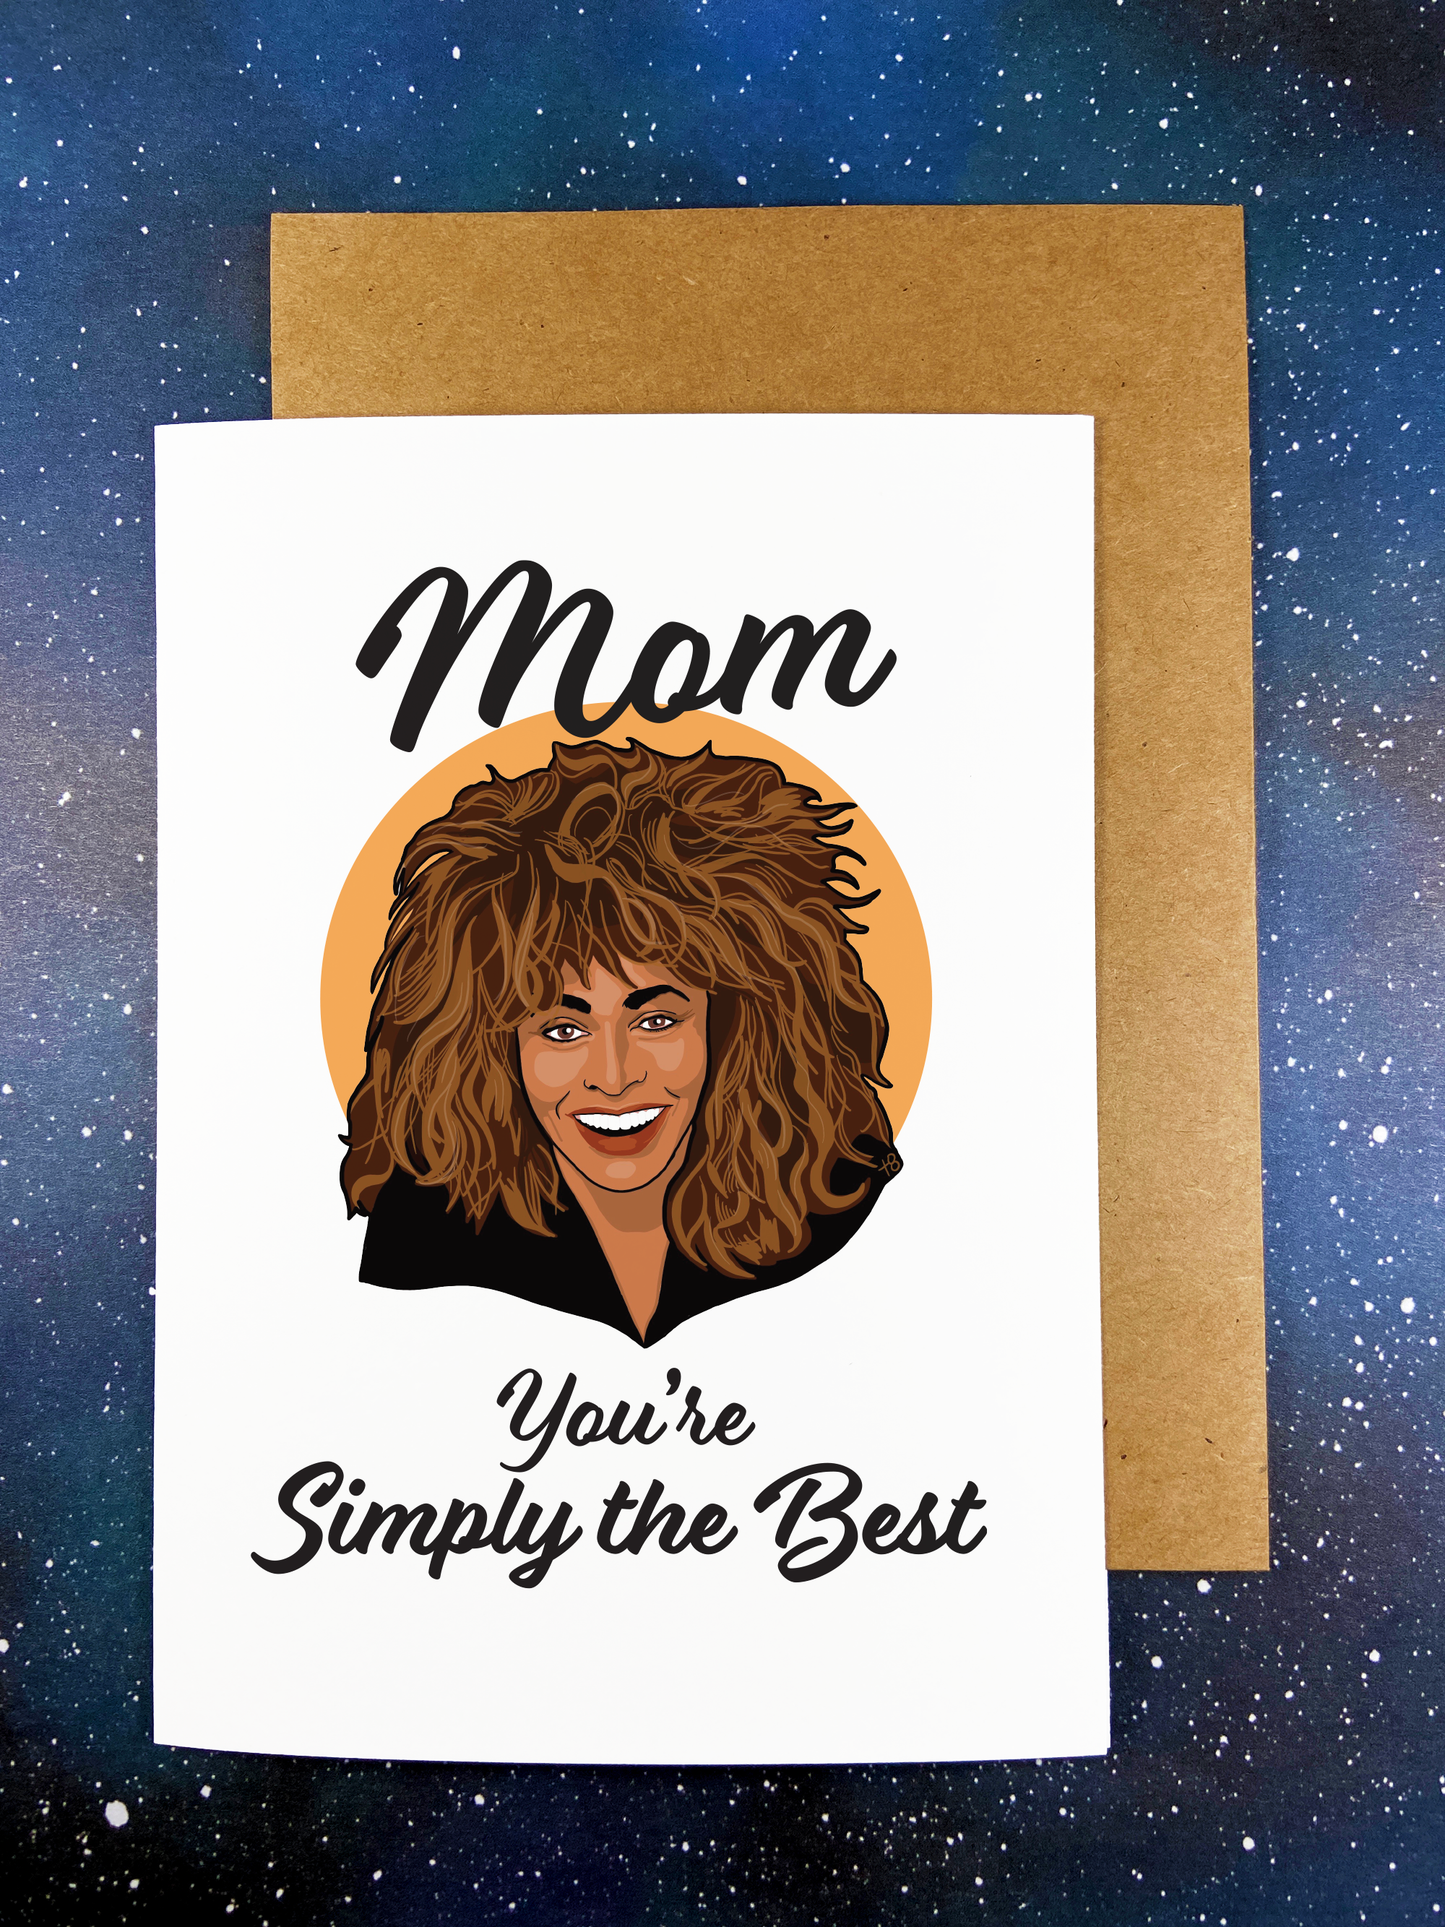 Tina Turner Mother's Day Greeting Card "Simply The Best"